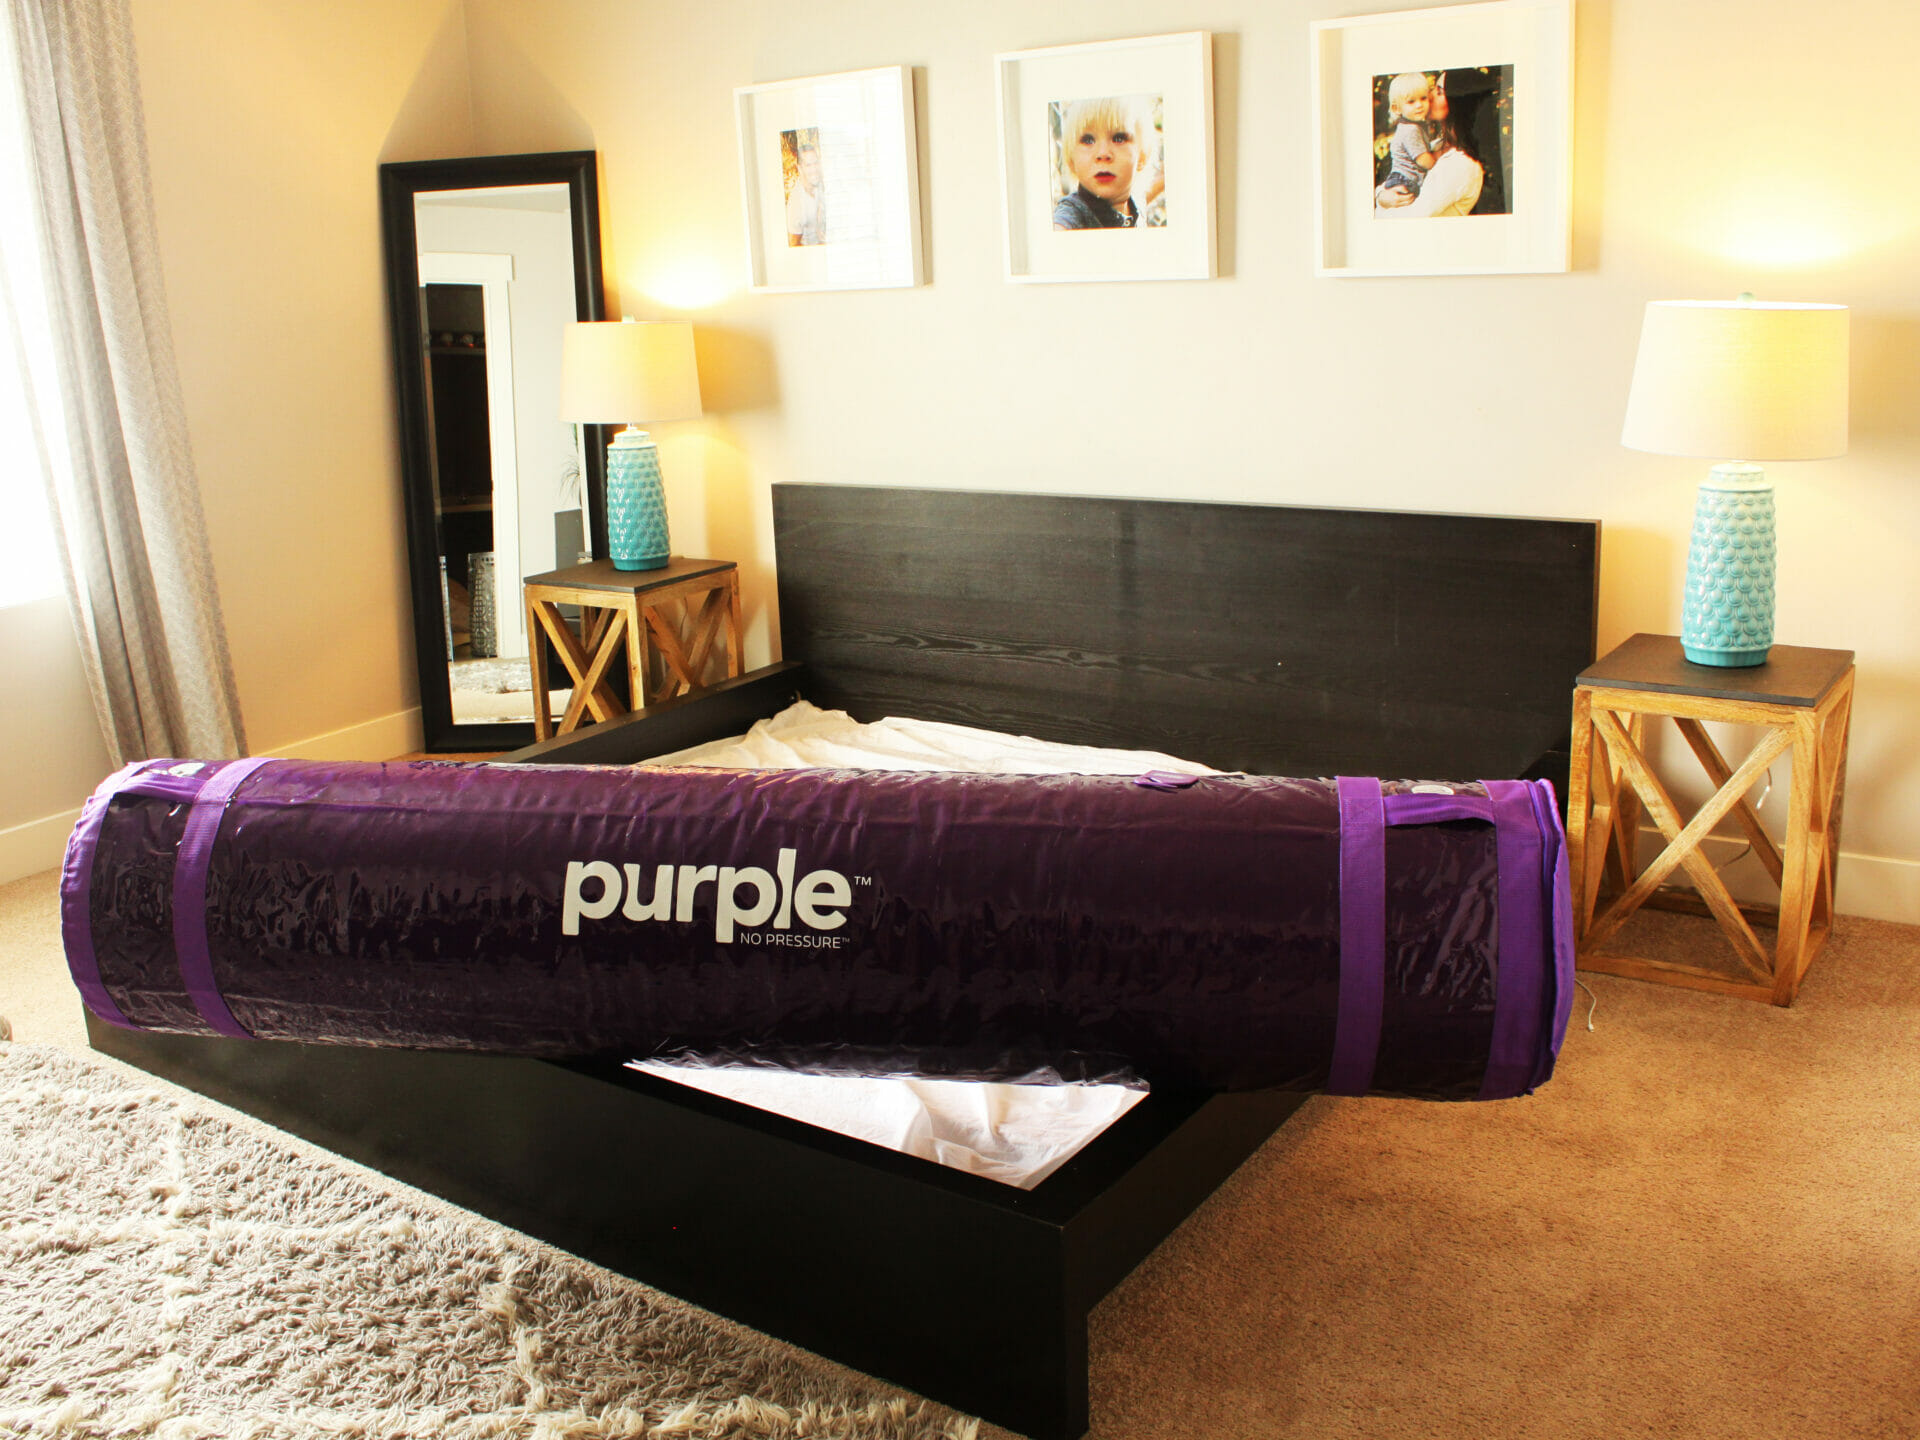 What Is The Powder In The Purple Mattress